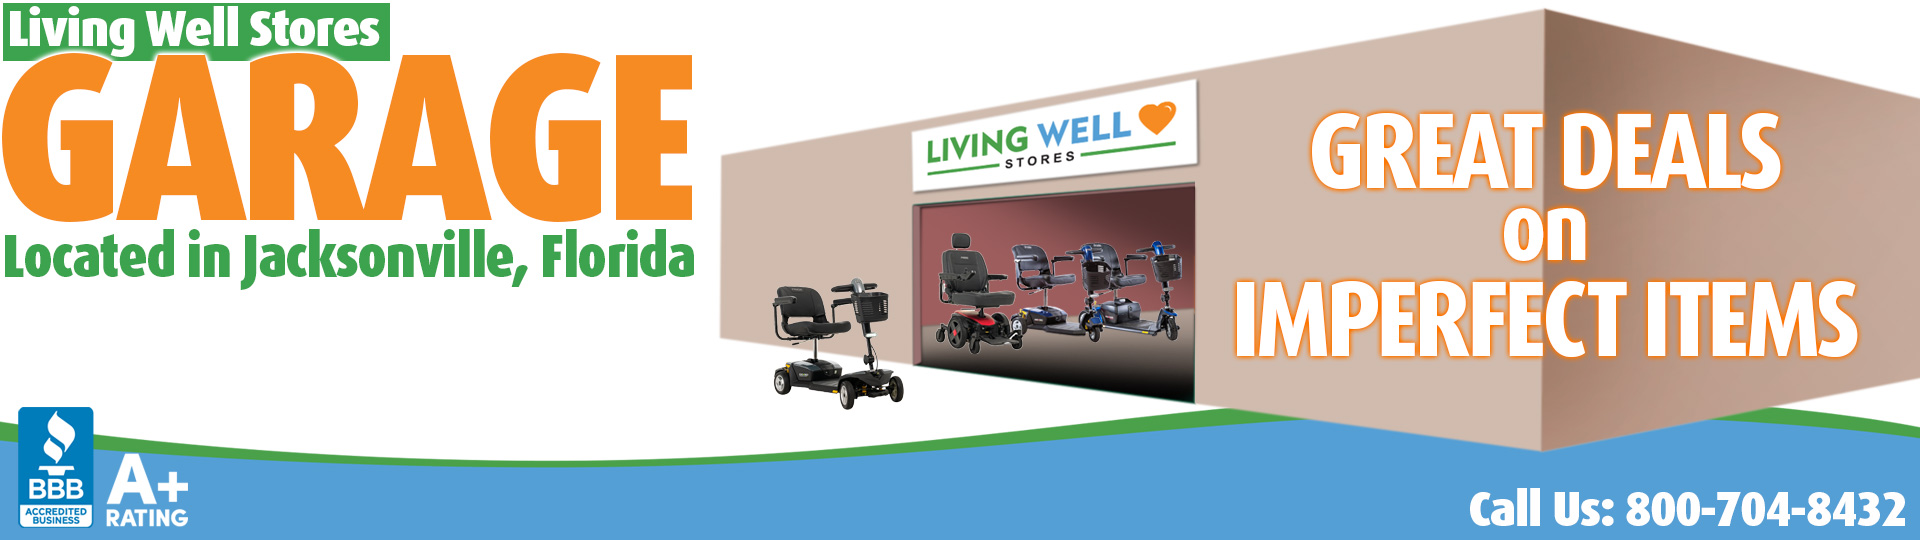 Living Well Stores Garage